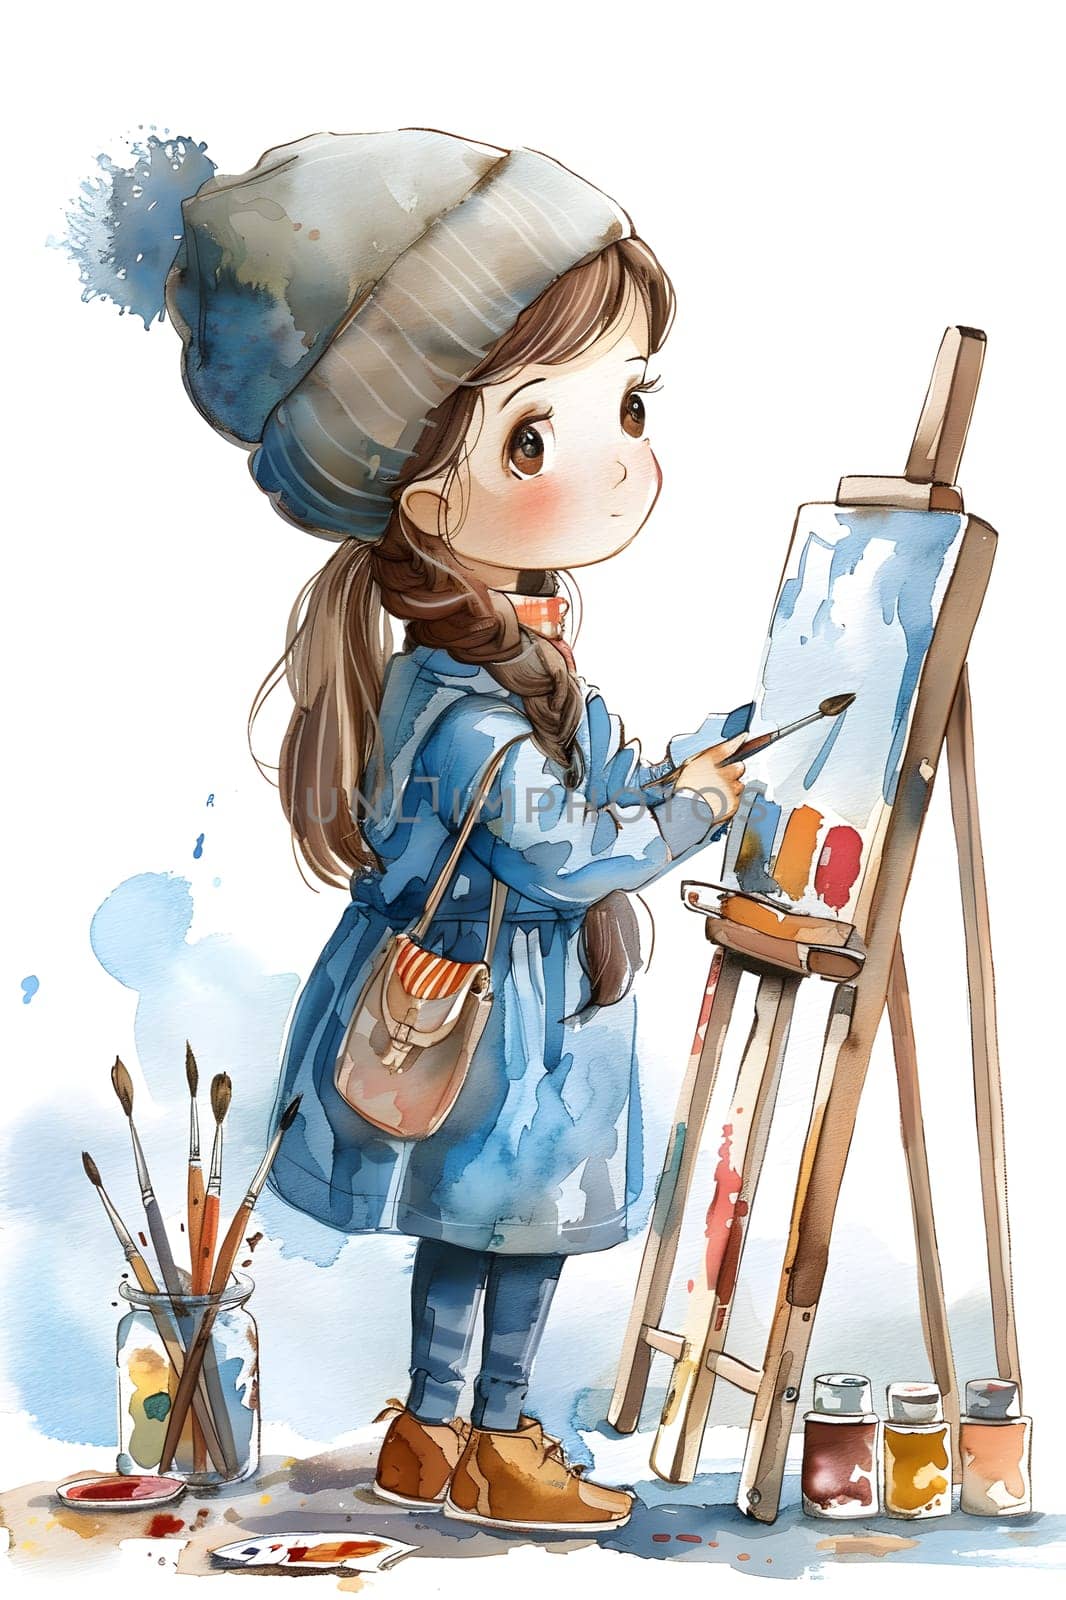 A young girl is creating a cartoon illustration on an easel with watercolor paint. Her artistic gesture brings the fictional character to life through her art